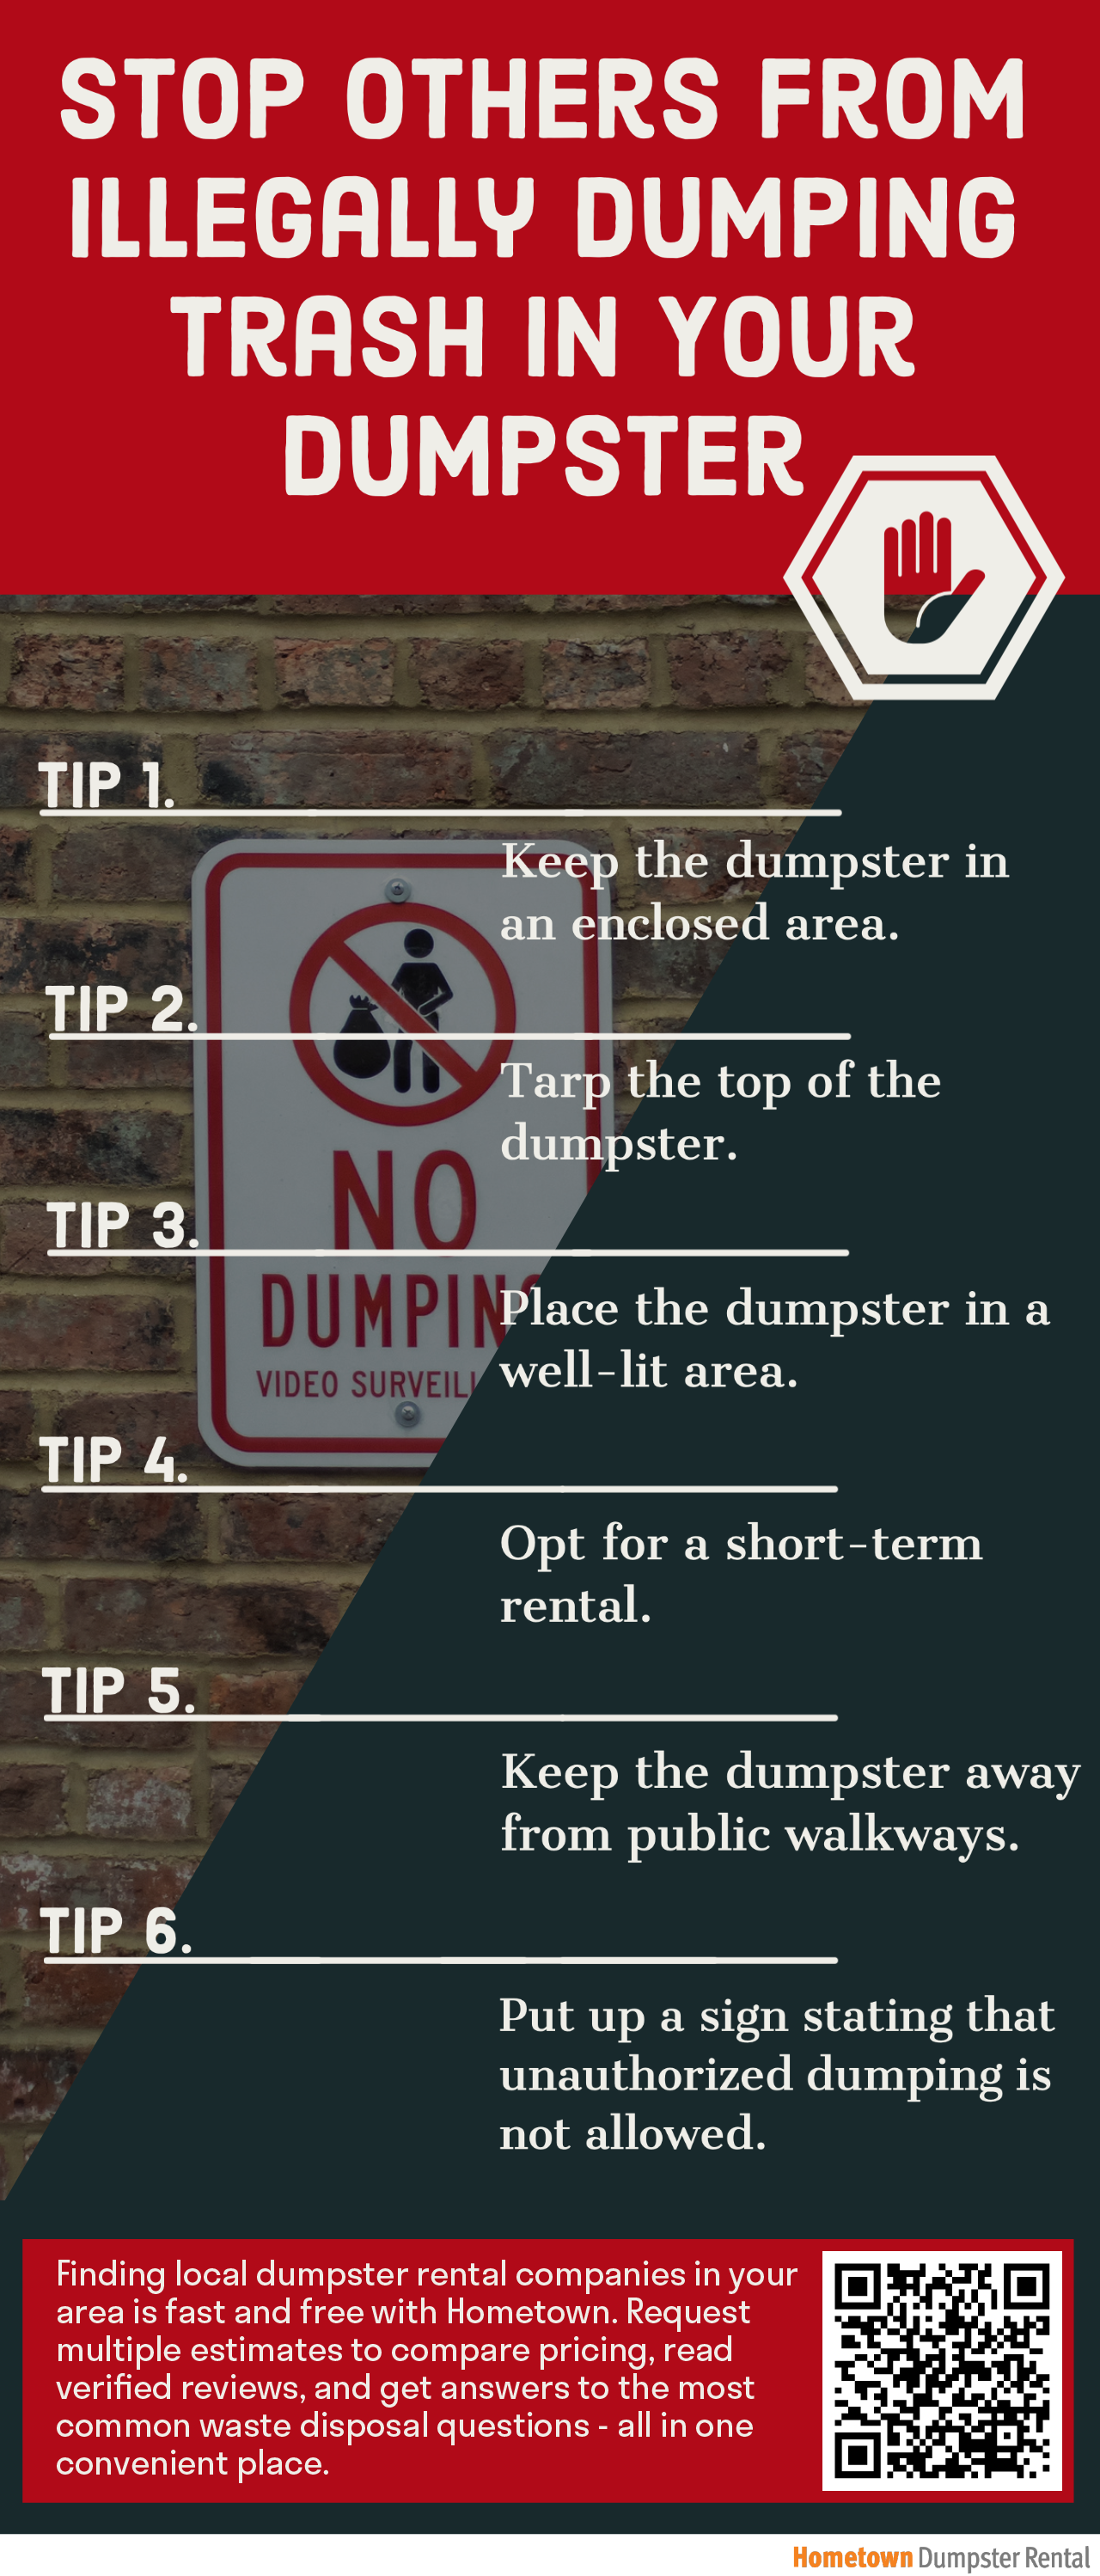 Solutions to Stop Others from Illegally Dumping Trash in Your Dumpster Infographic